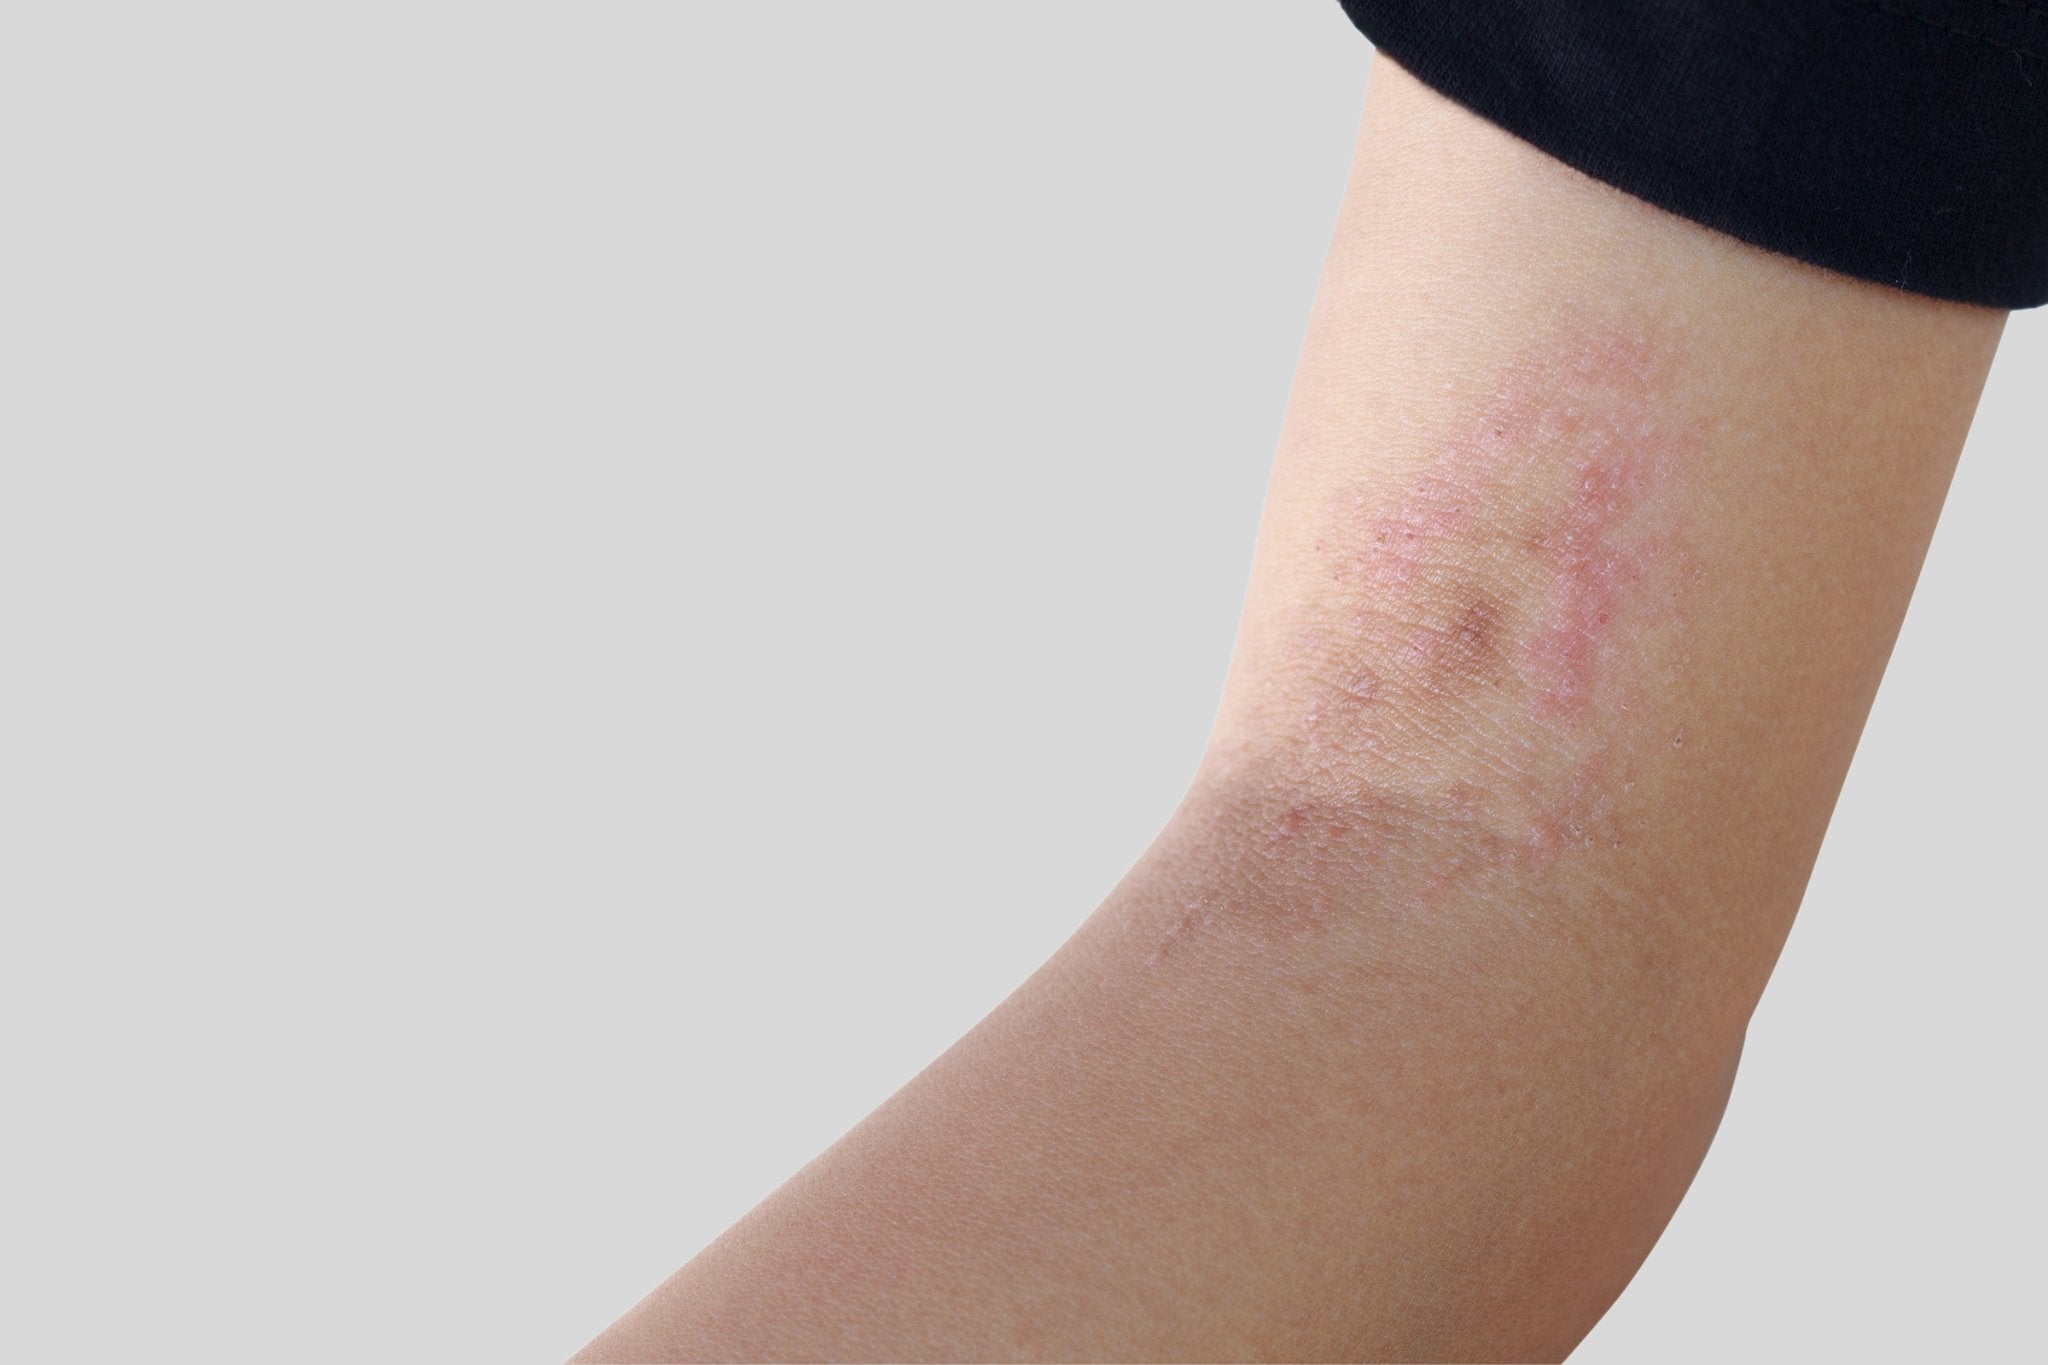 Fungal Skin Infection Treatment: 3 Best Methods